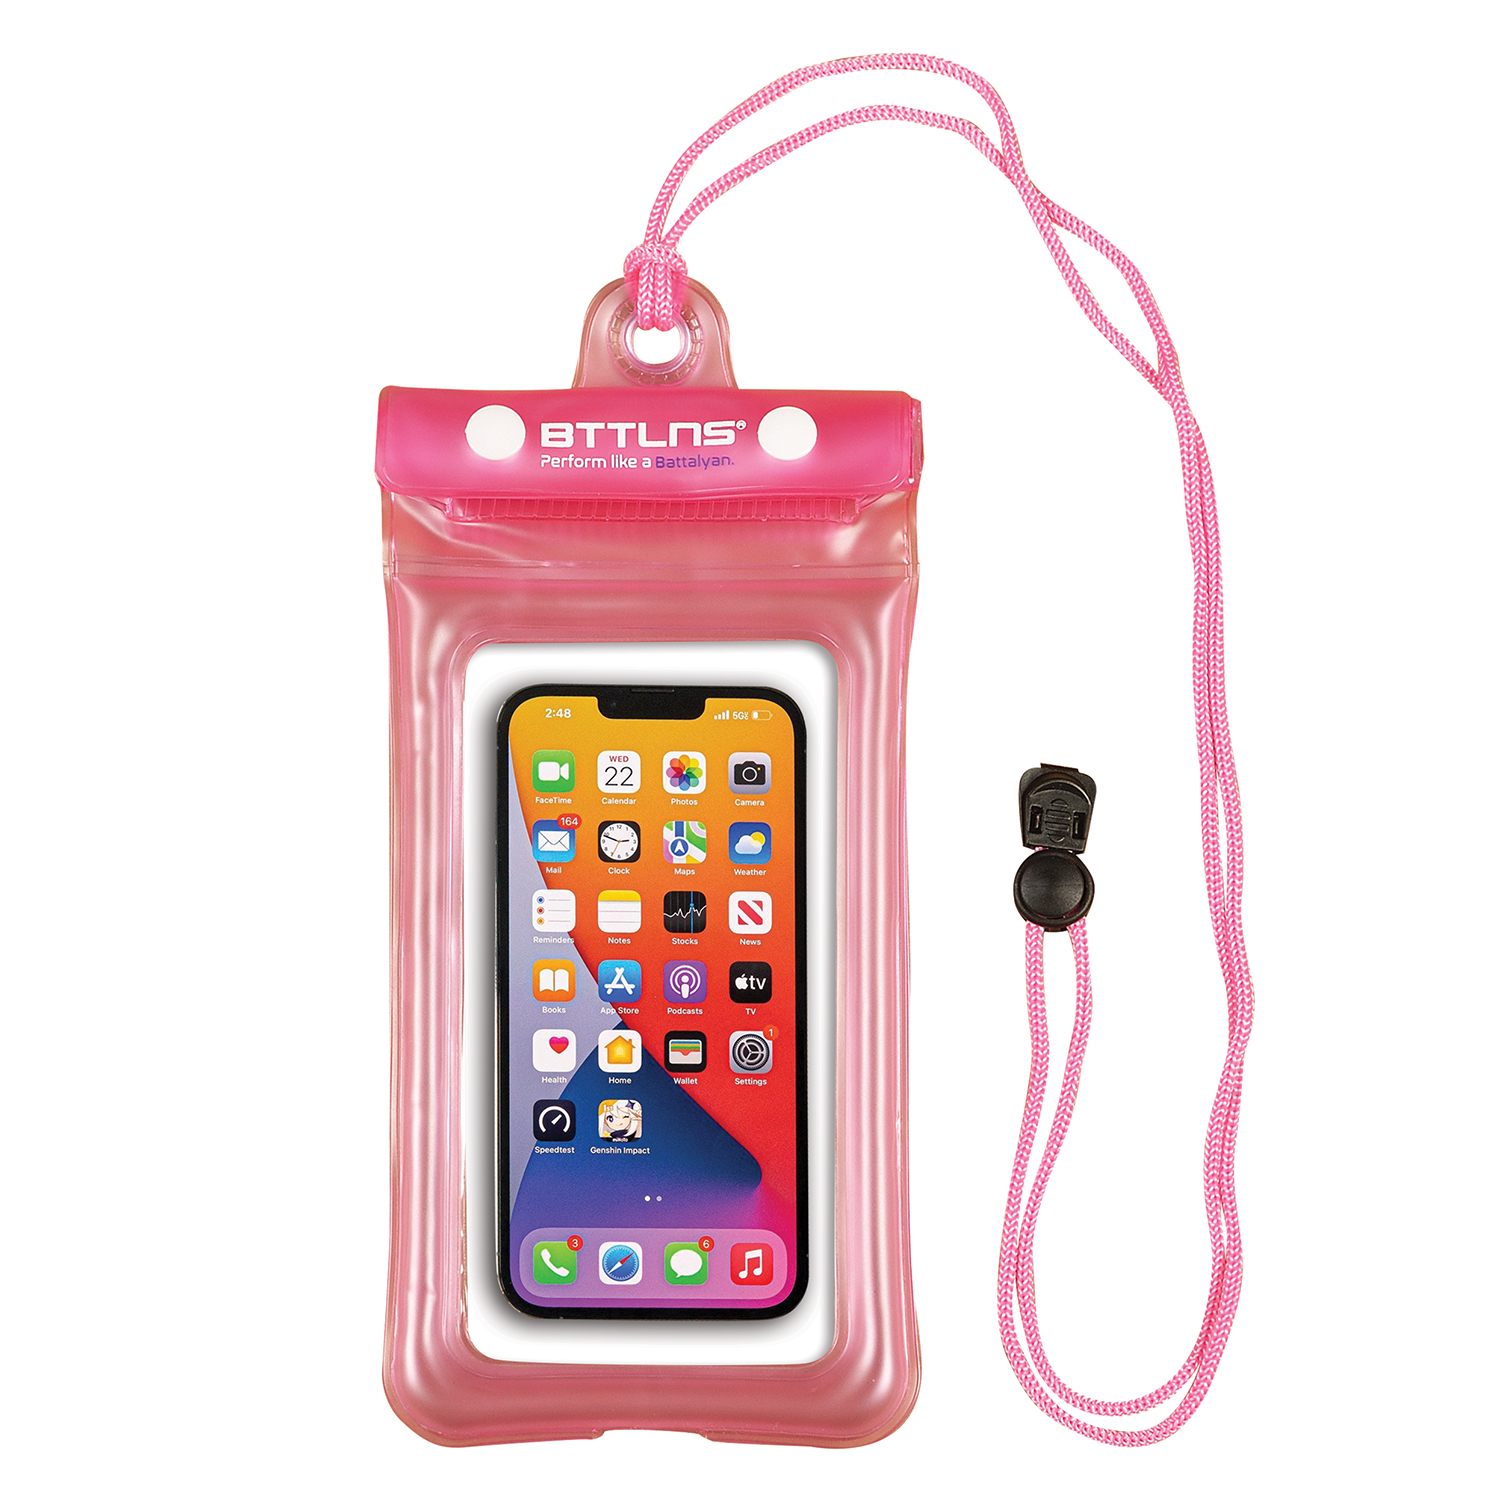 BTTLNS floating waterproof phone pouch Endymion 1.0 pink  0317013-072